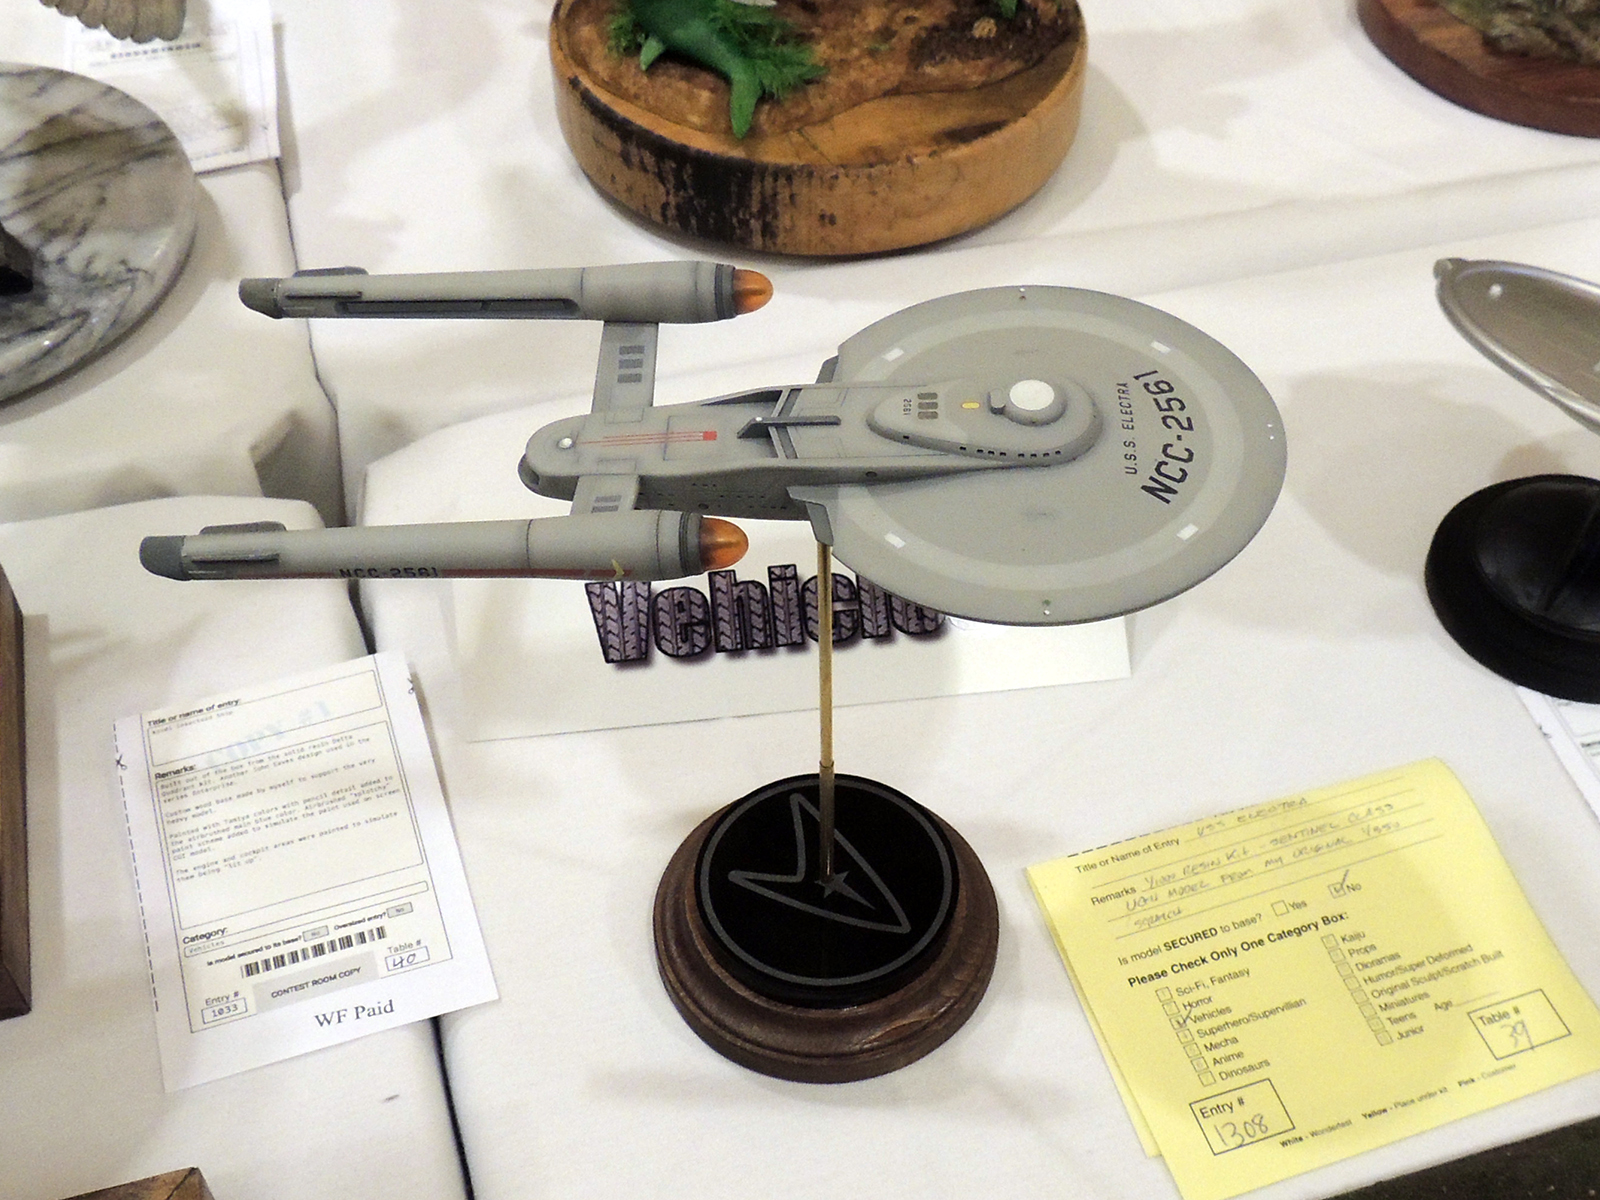  1/1000 'Endurance'-class starship from Ugh Models, based n a scratchbuild by Bill Krause - (click to close)